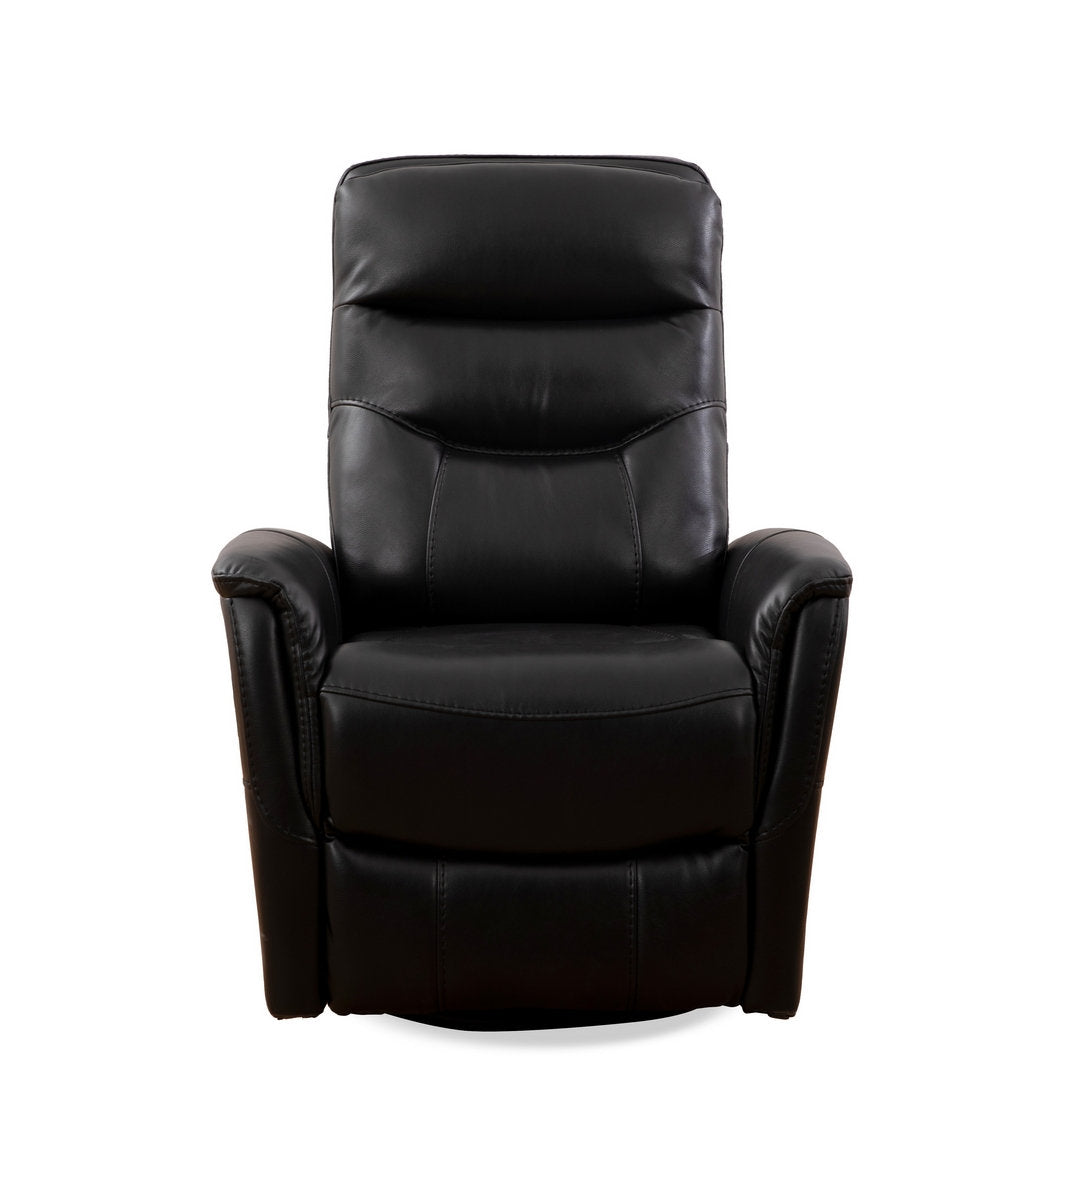 Black PU Swivel Power Recliner Chair with Solid Hardwood Frame